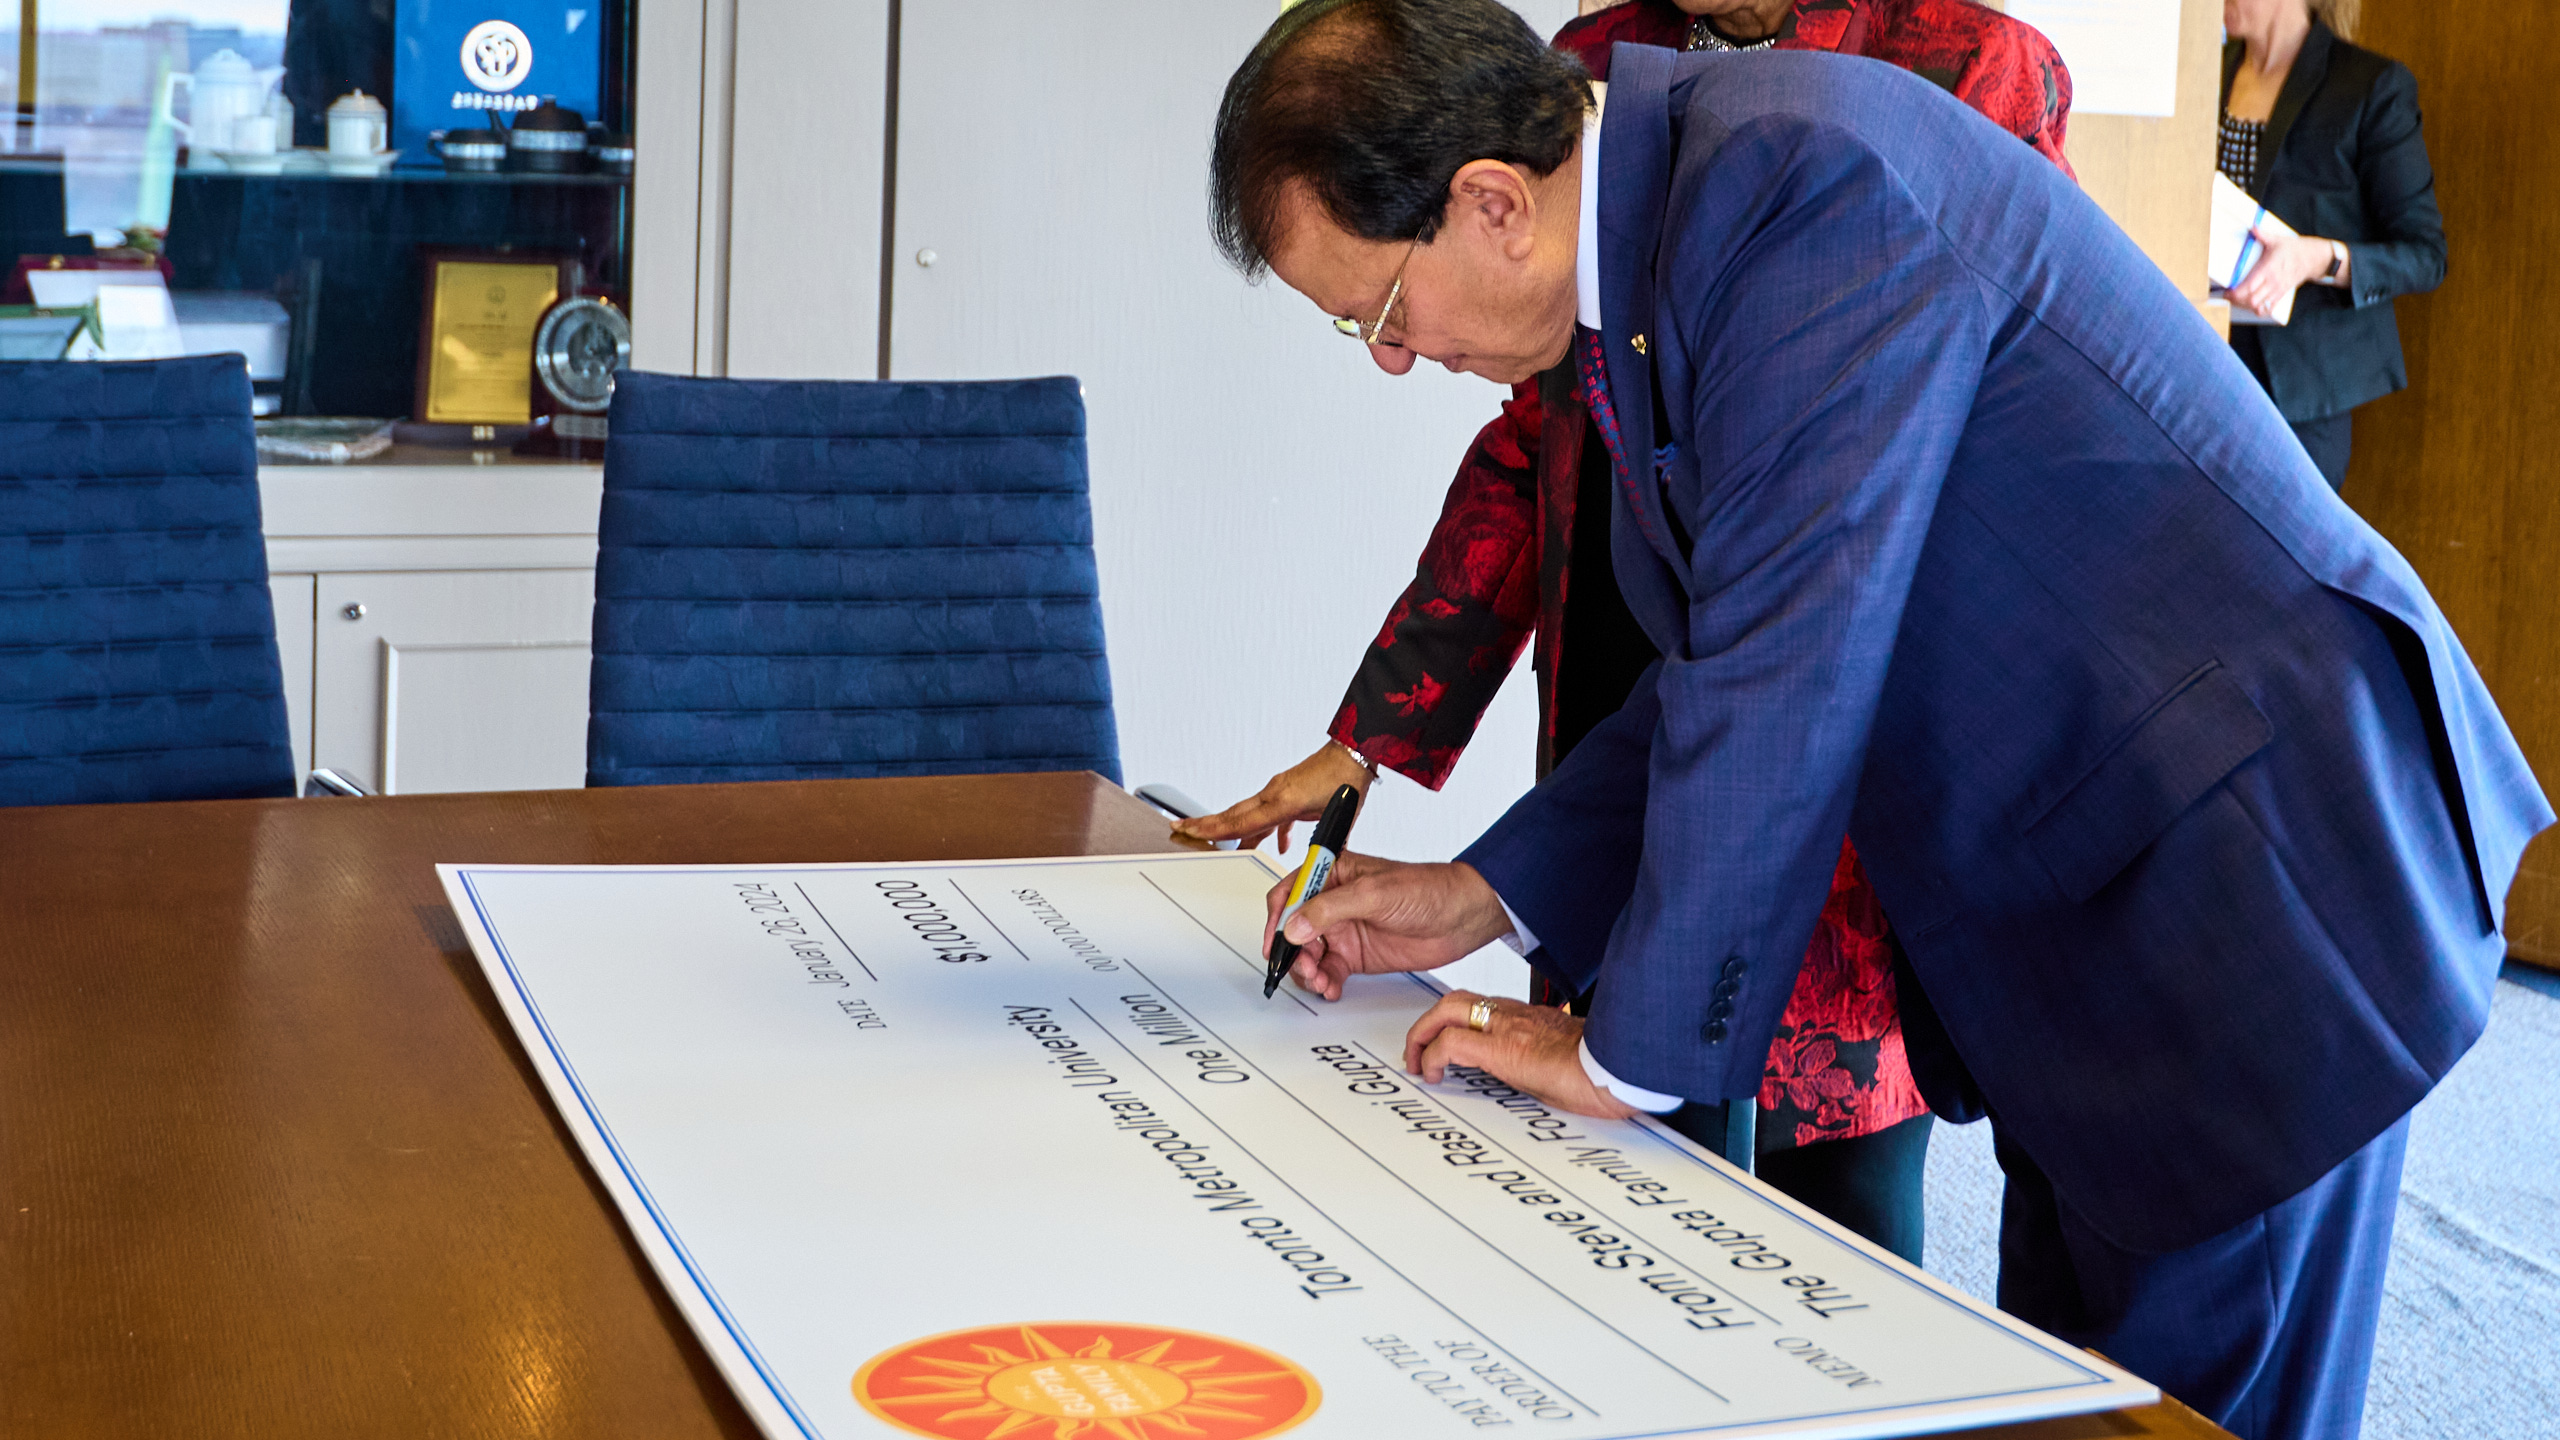 Man signing cheque with Sharpie marker. Large cheque placed on table.